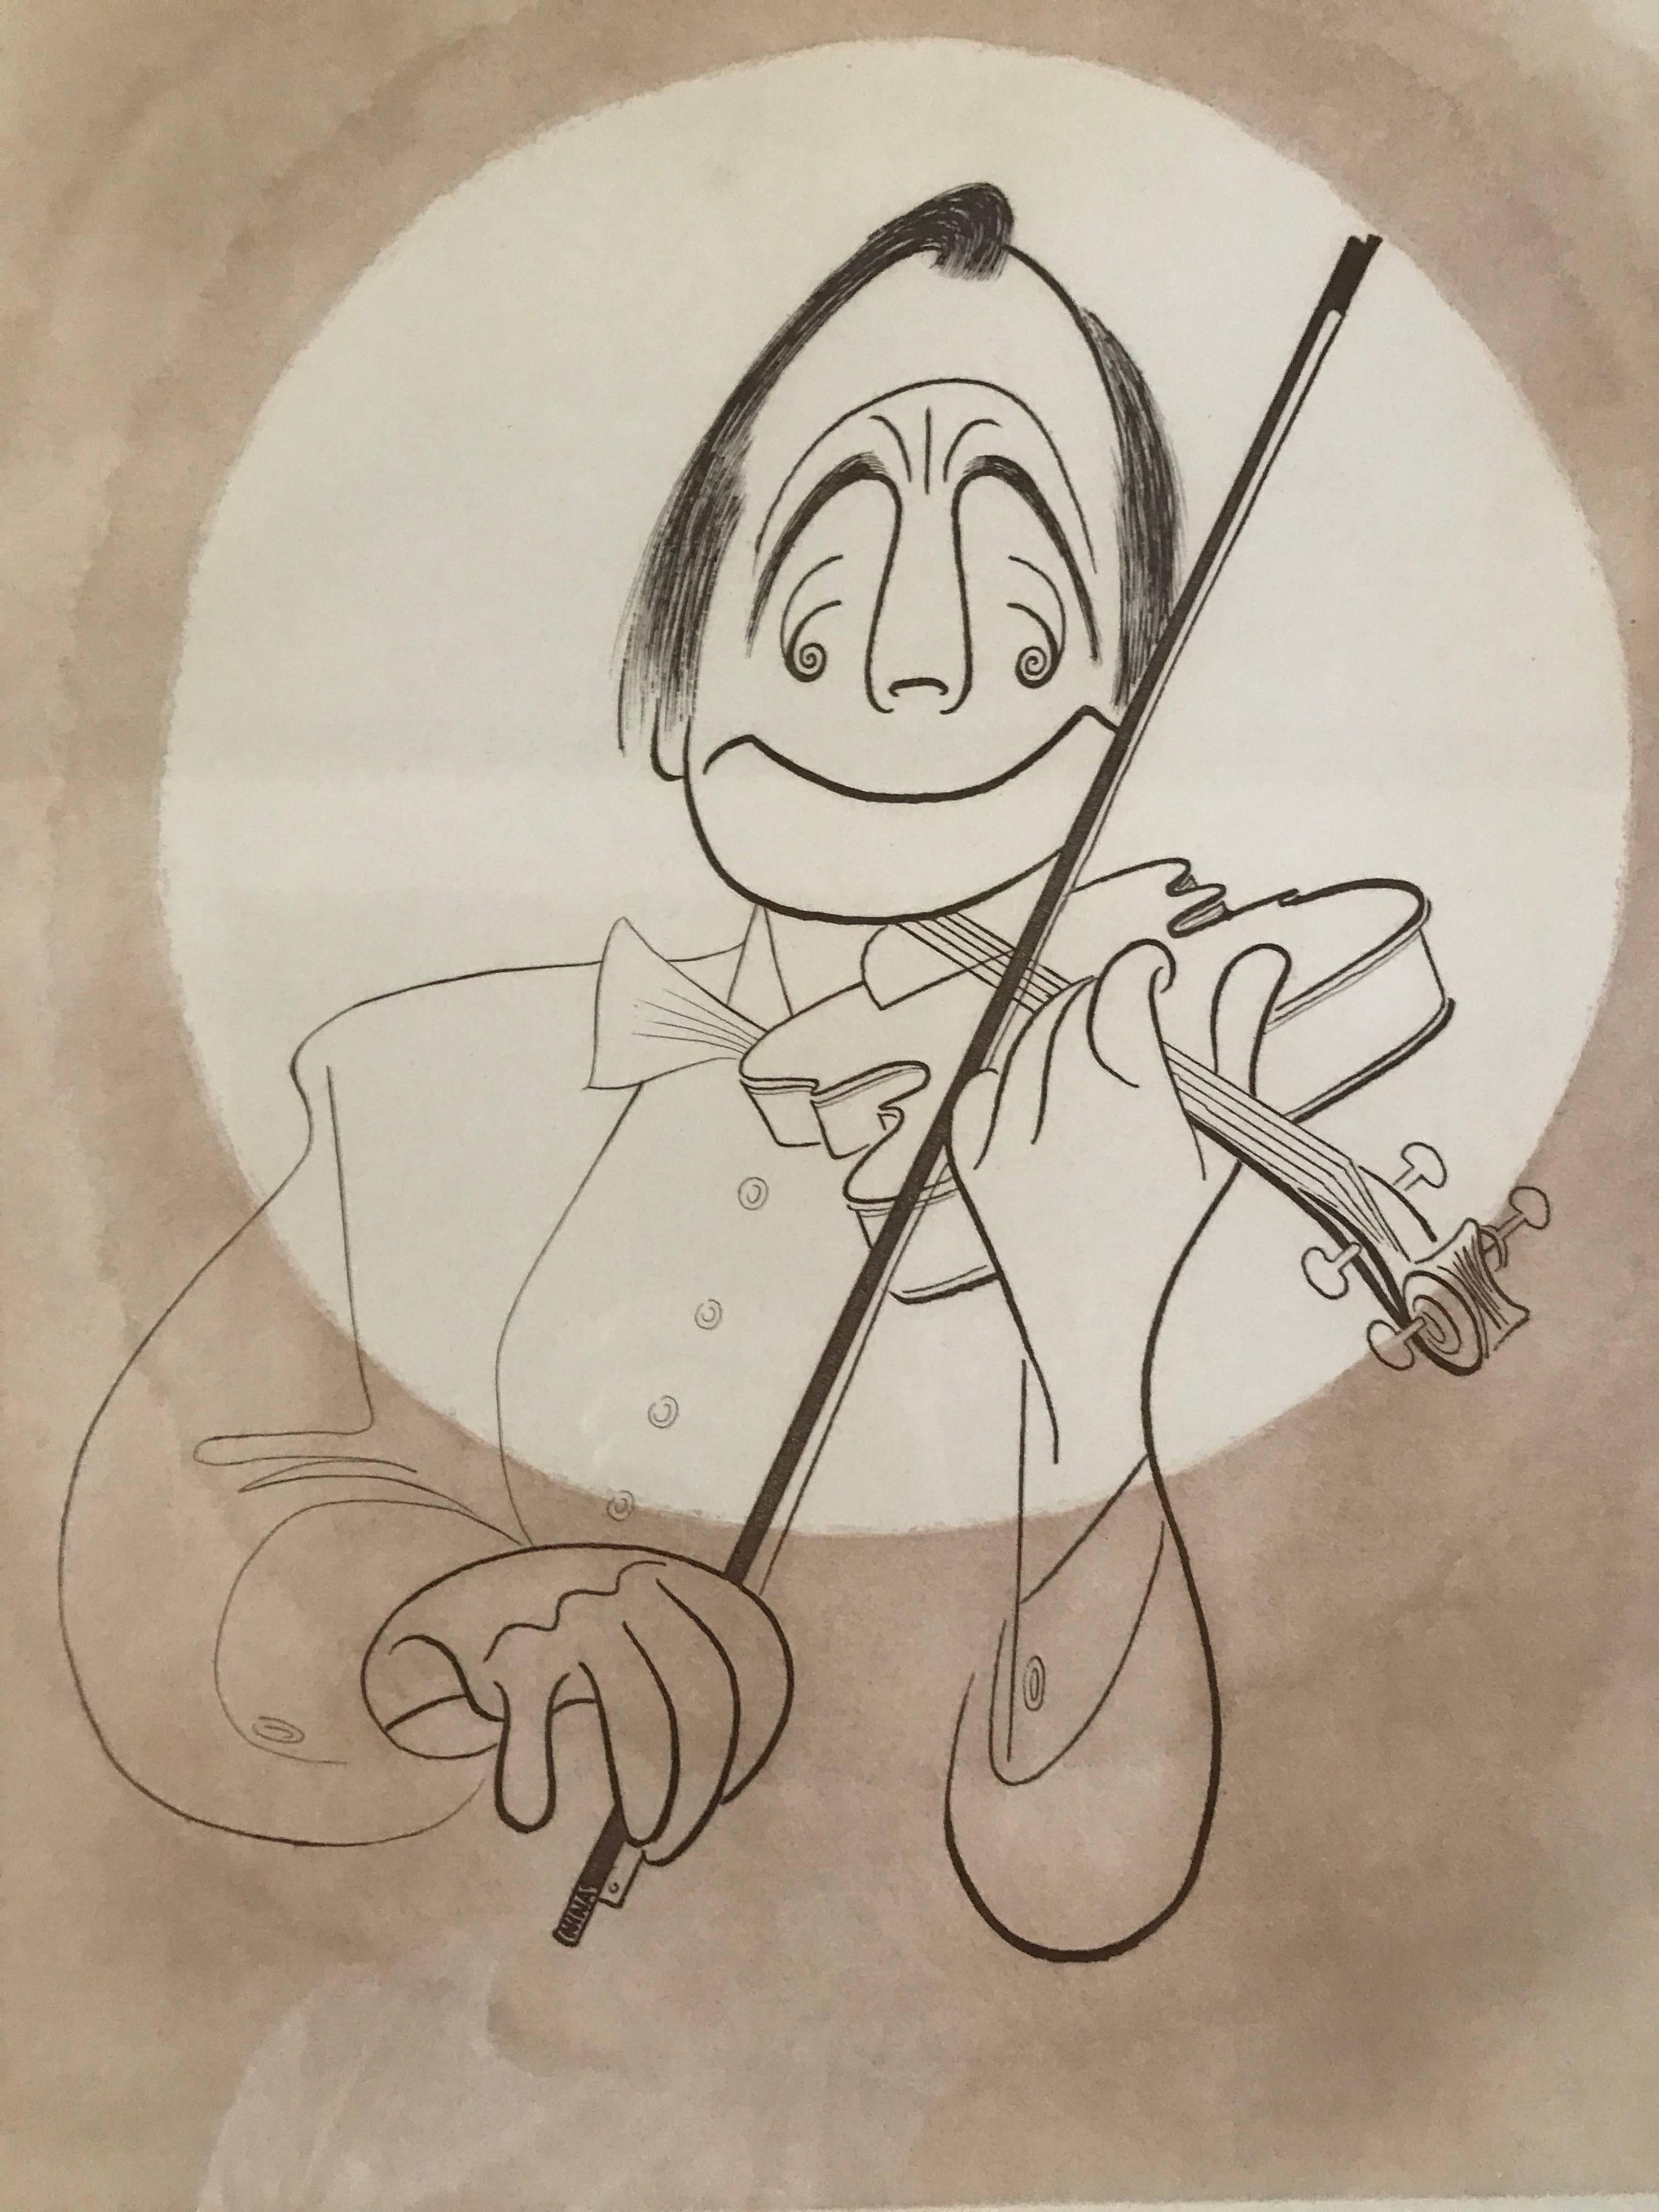 Albert Hirschfeld was an American caricaturist best known for his black and white portraits of celebrities and Broadway stars. Wikipedia
Born: June 21, 1903, St. Louis, MO
Died: January 20, 2003, New York City, NY
Image size 15 1/2 x 11